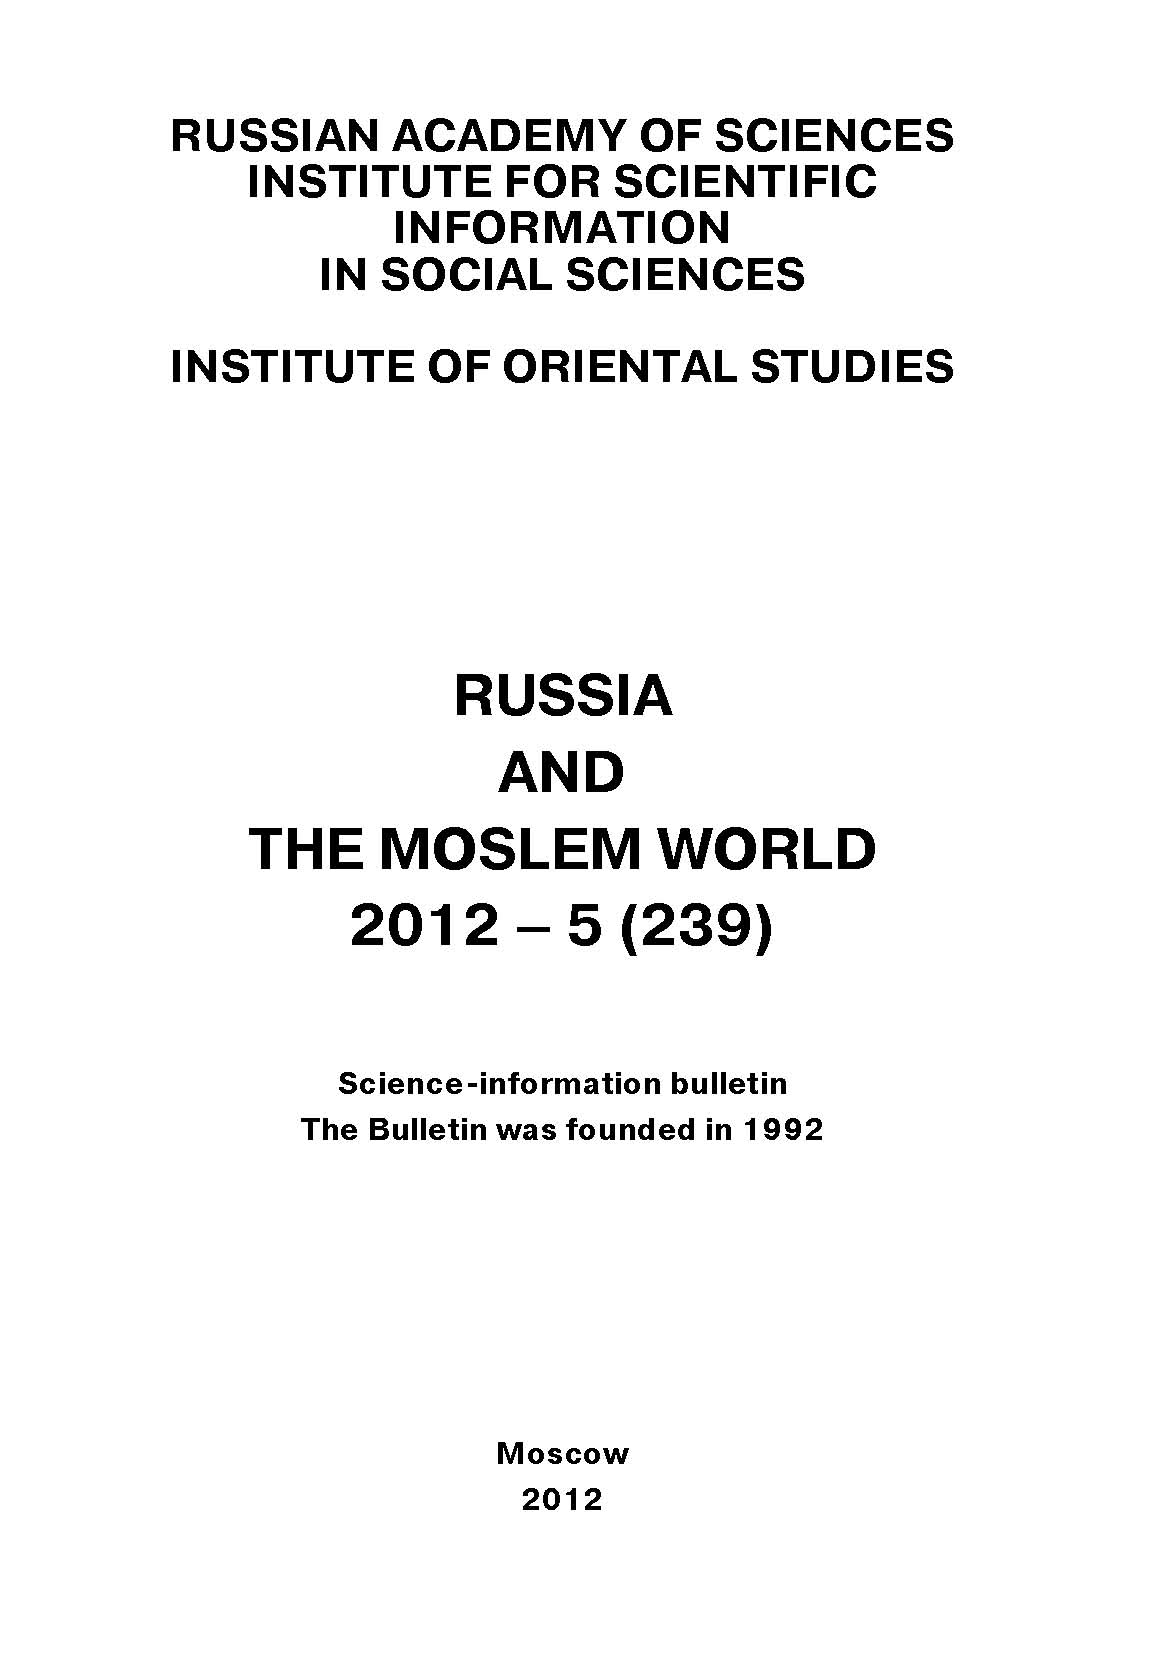 Russia and the Moslem World№ 05 / 2012